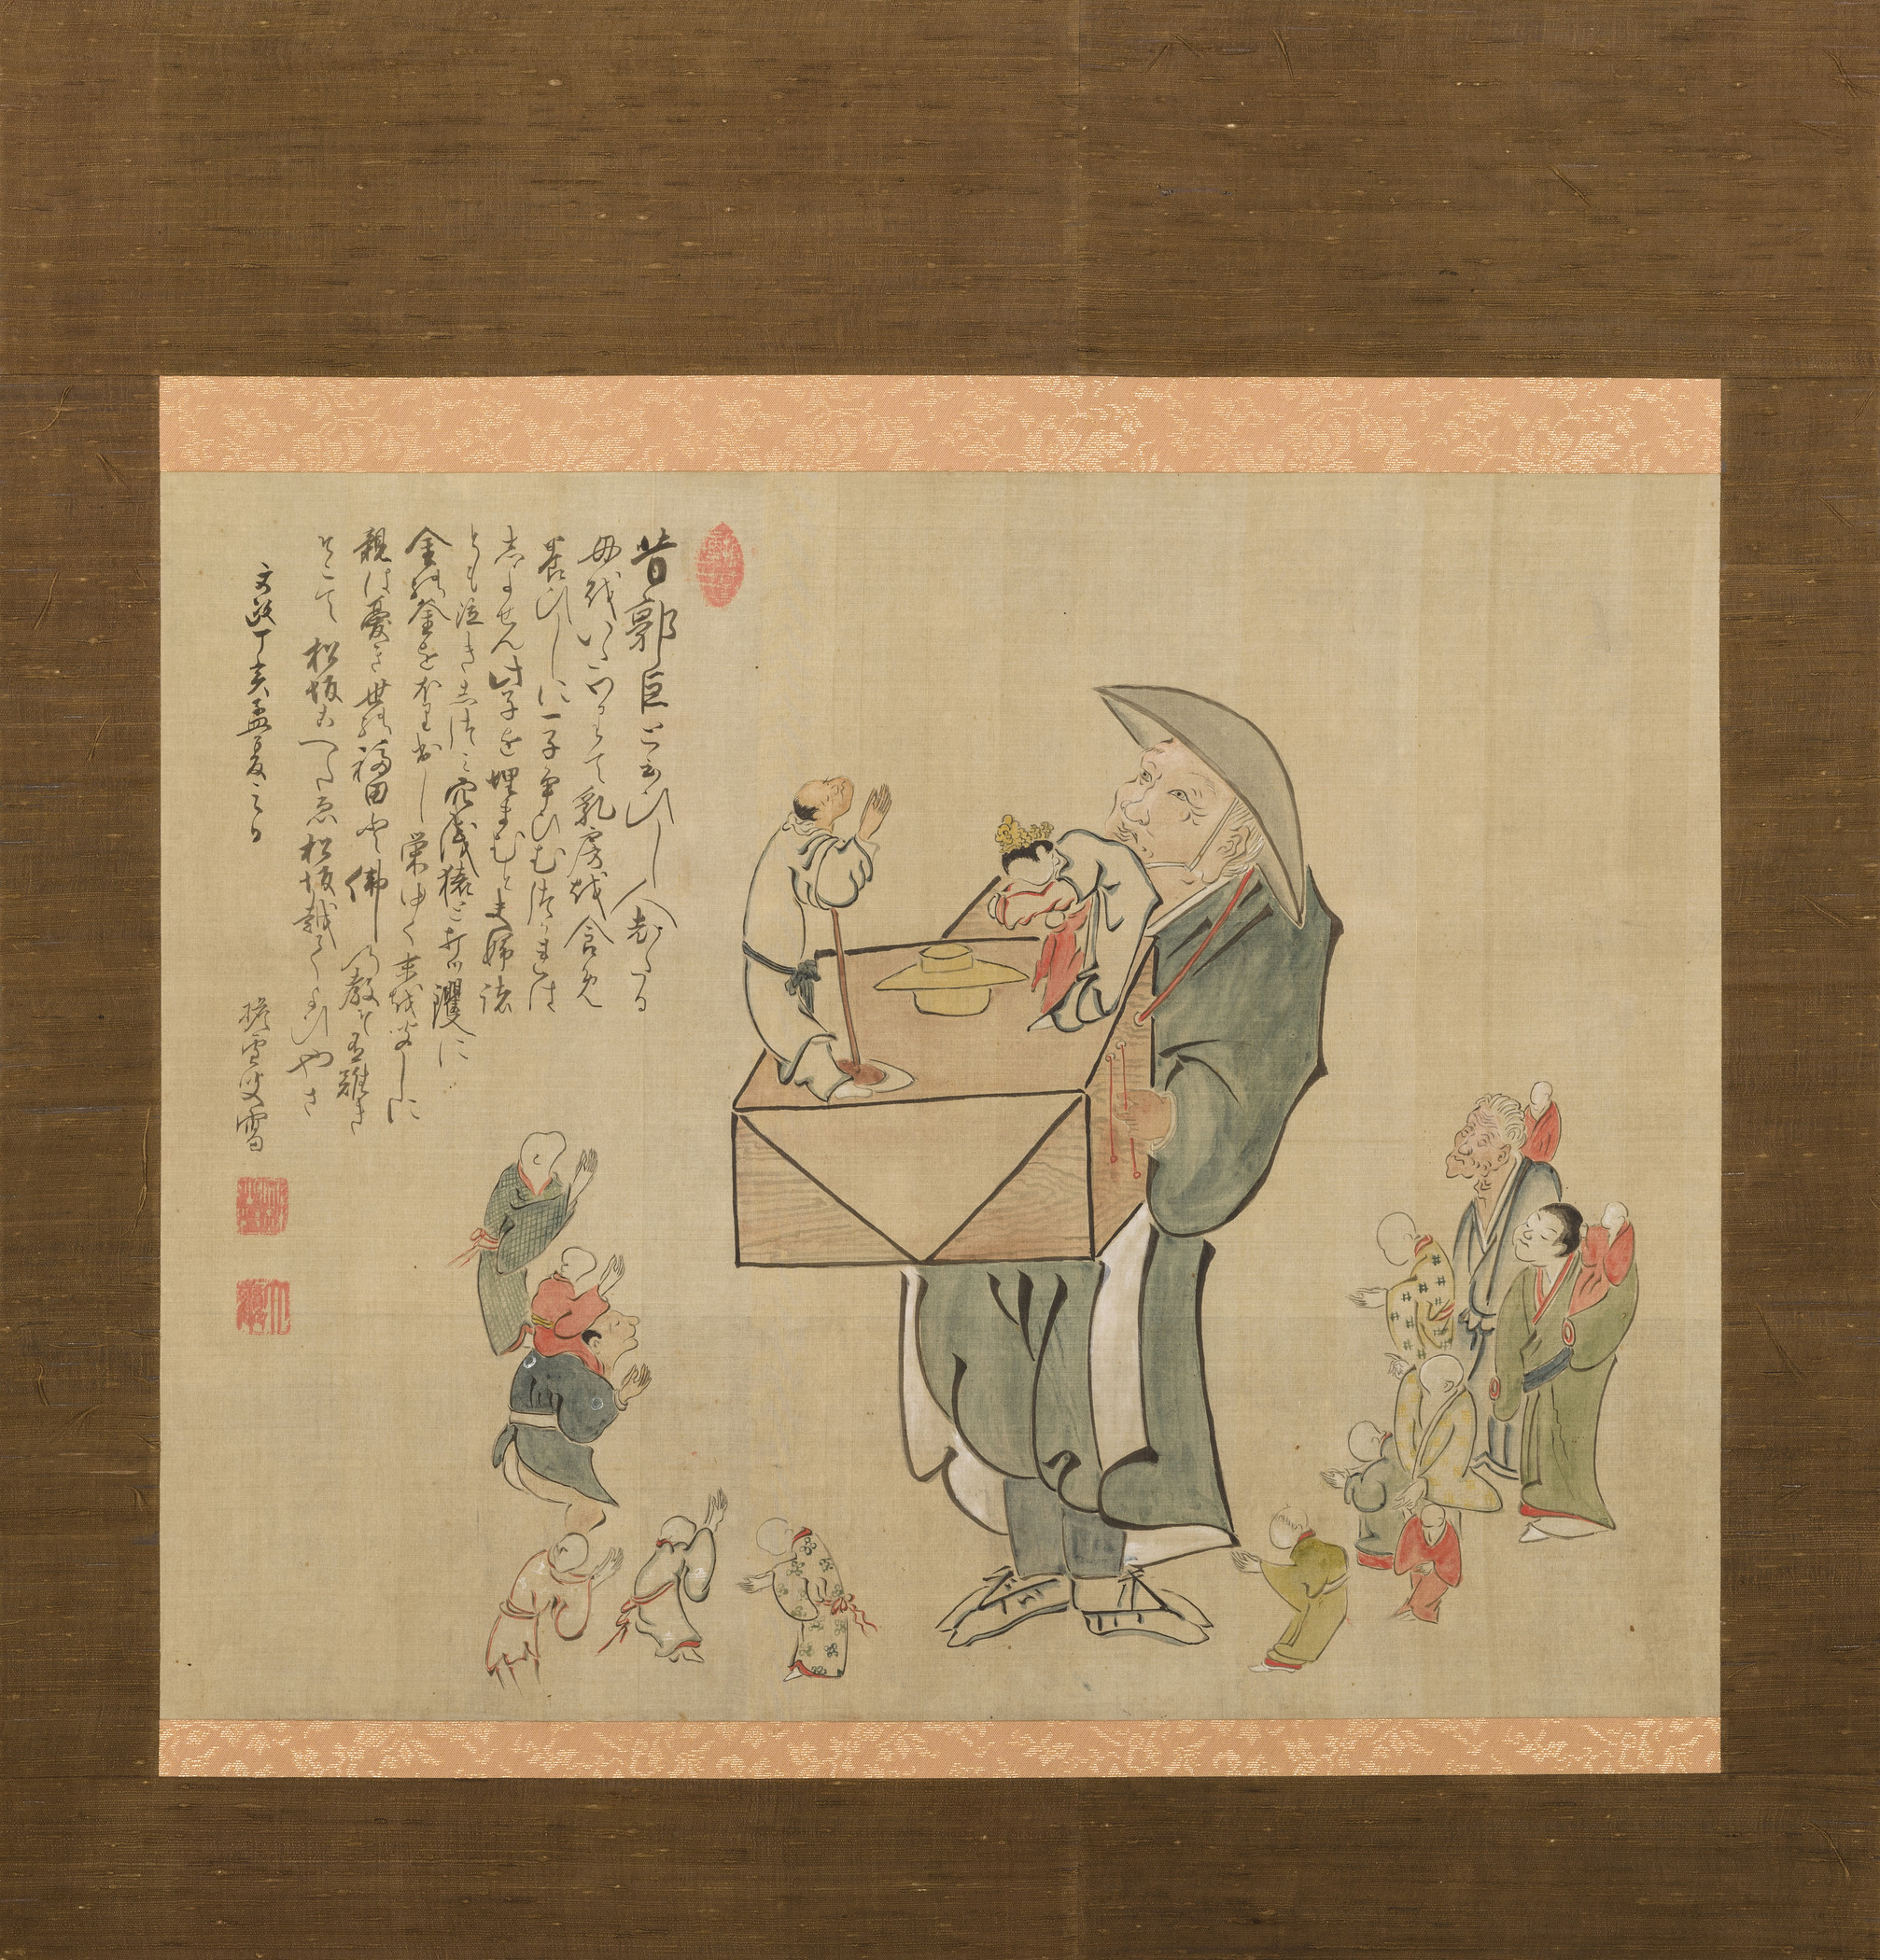 Taikan Monju, Puppeteer, 1827, Los Angeles County Museum of Art, gift of the Robert and Helen Kuhn Family Trust, photo © Museum Associates/LACMA